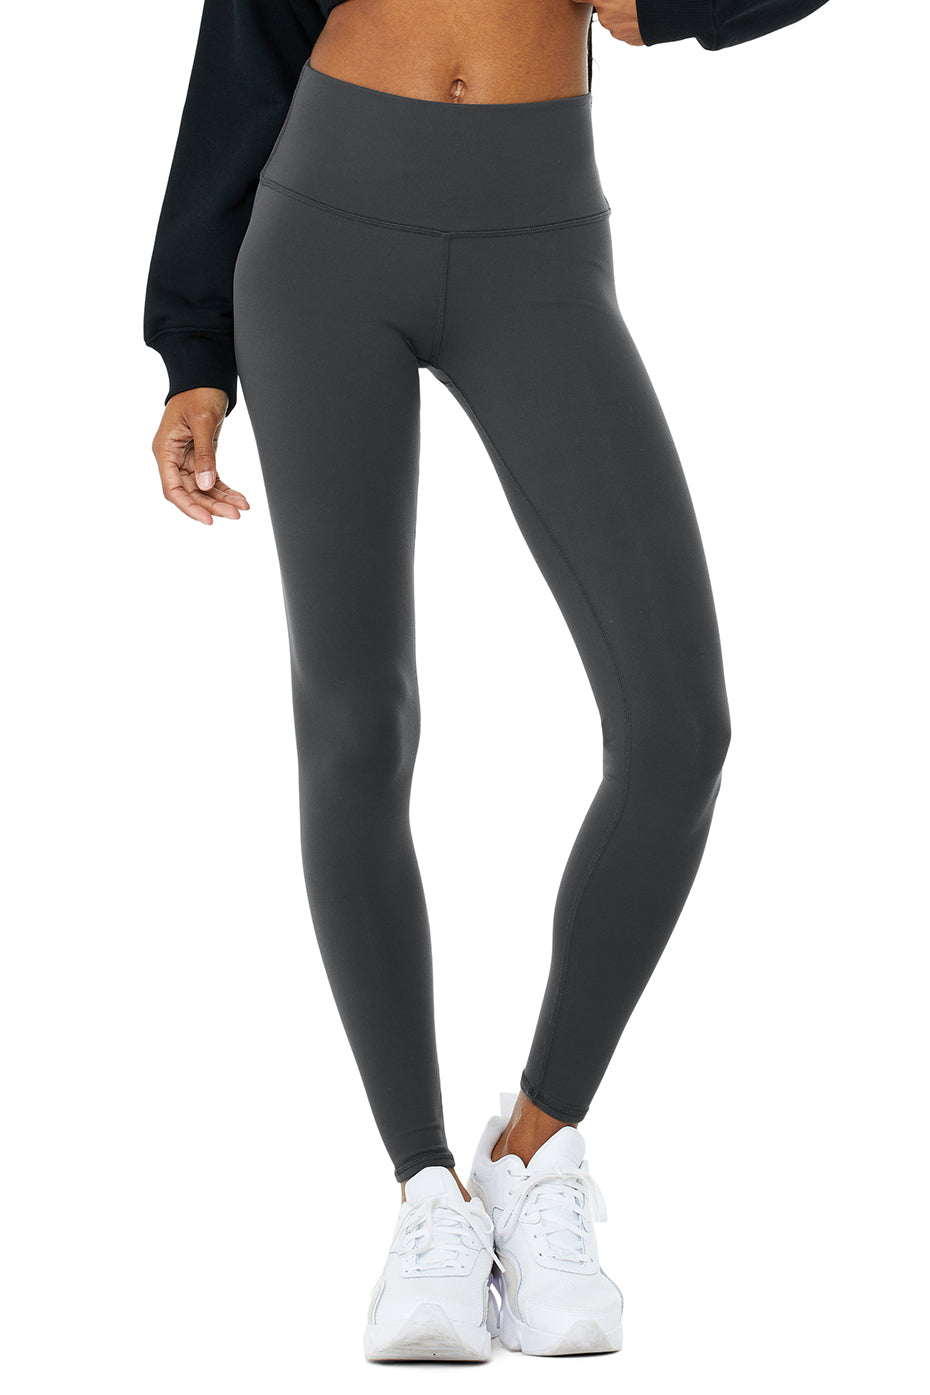 High-Waist Winter Warmth Plush Legging in Anthracite by Alo Yoga